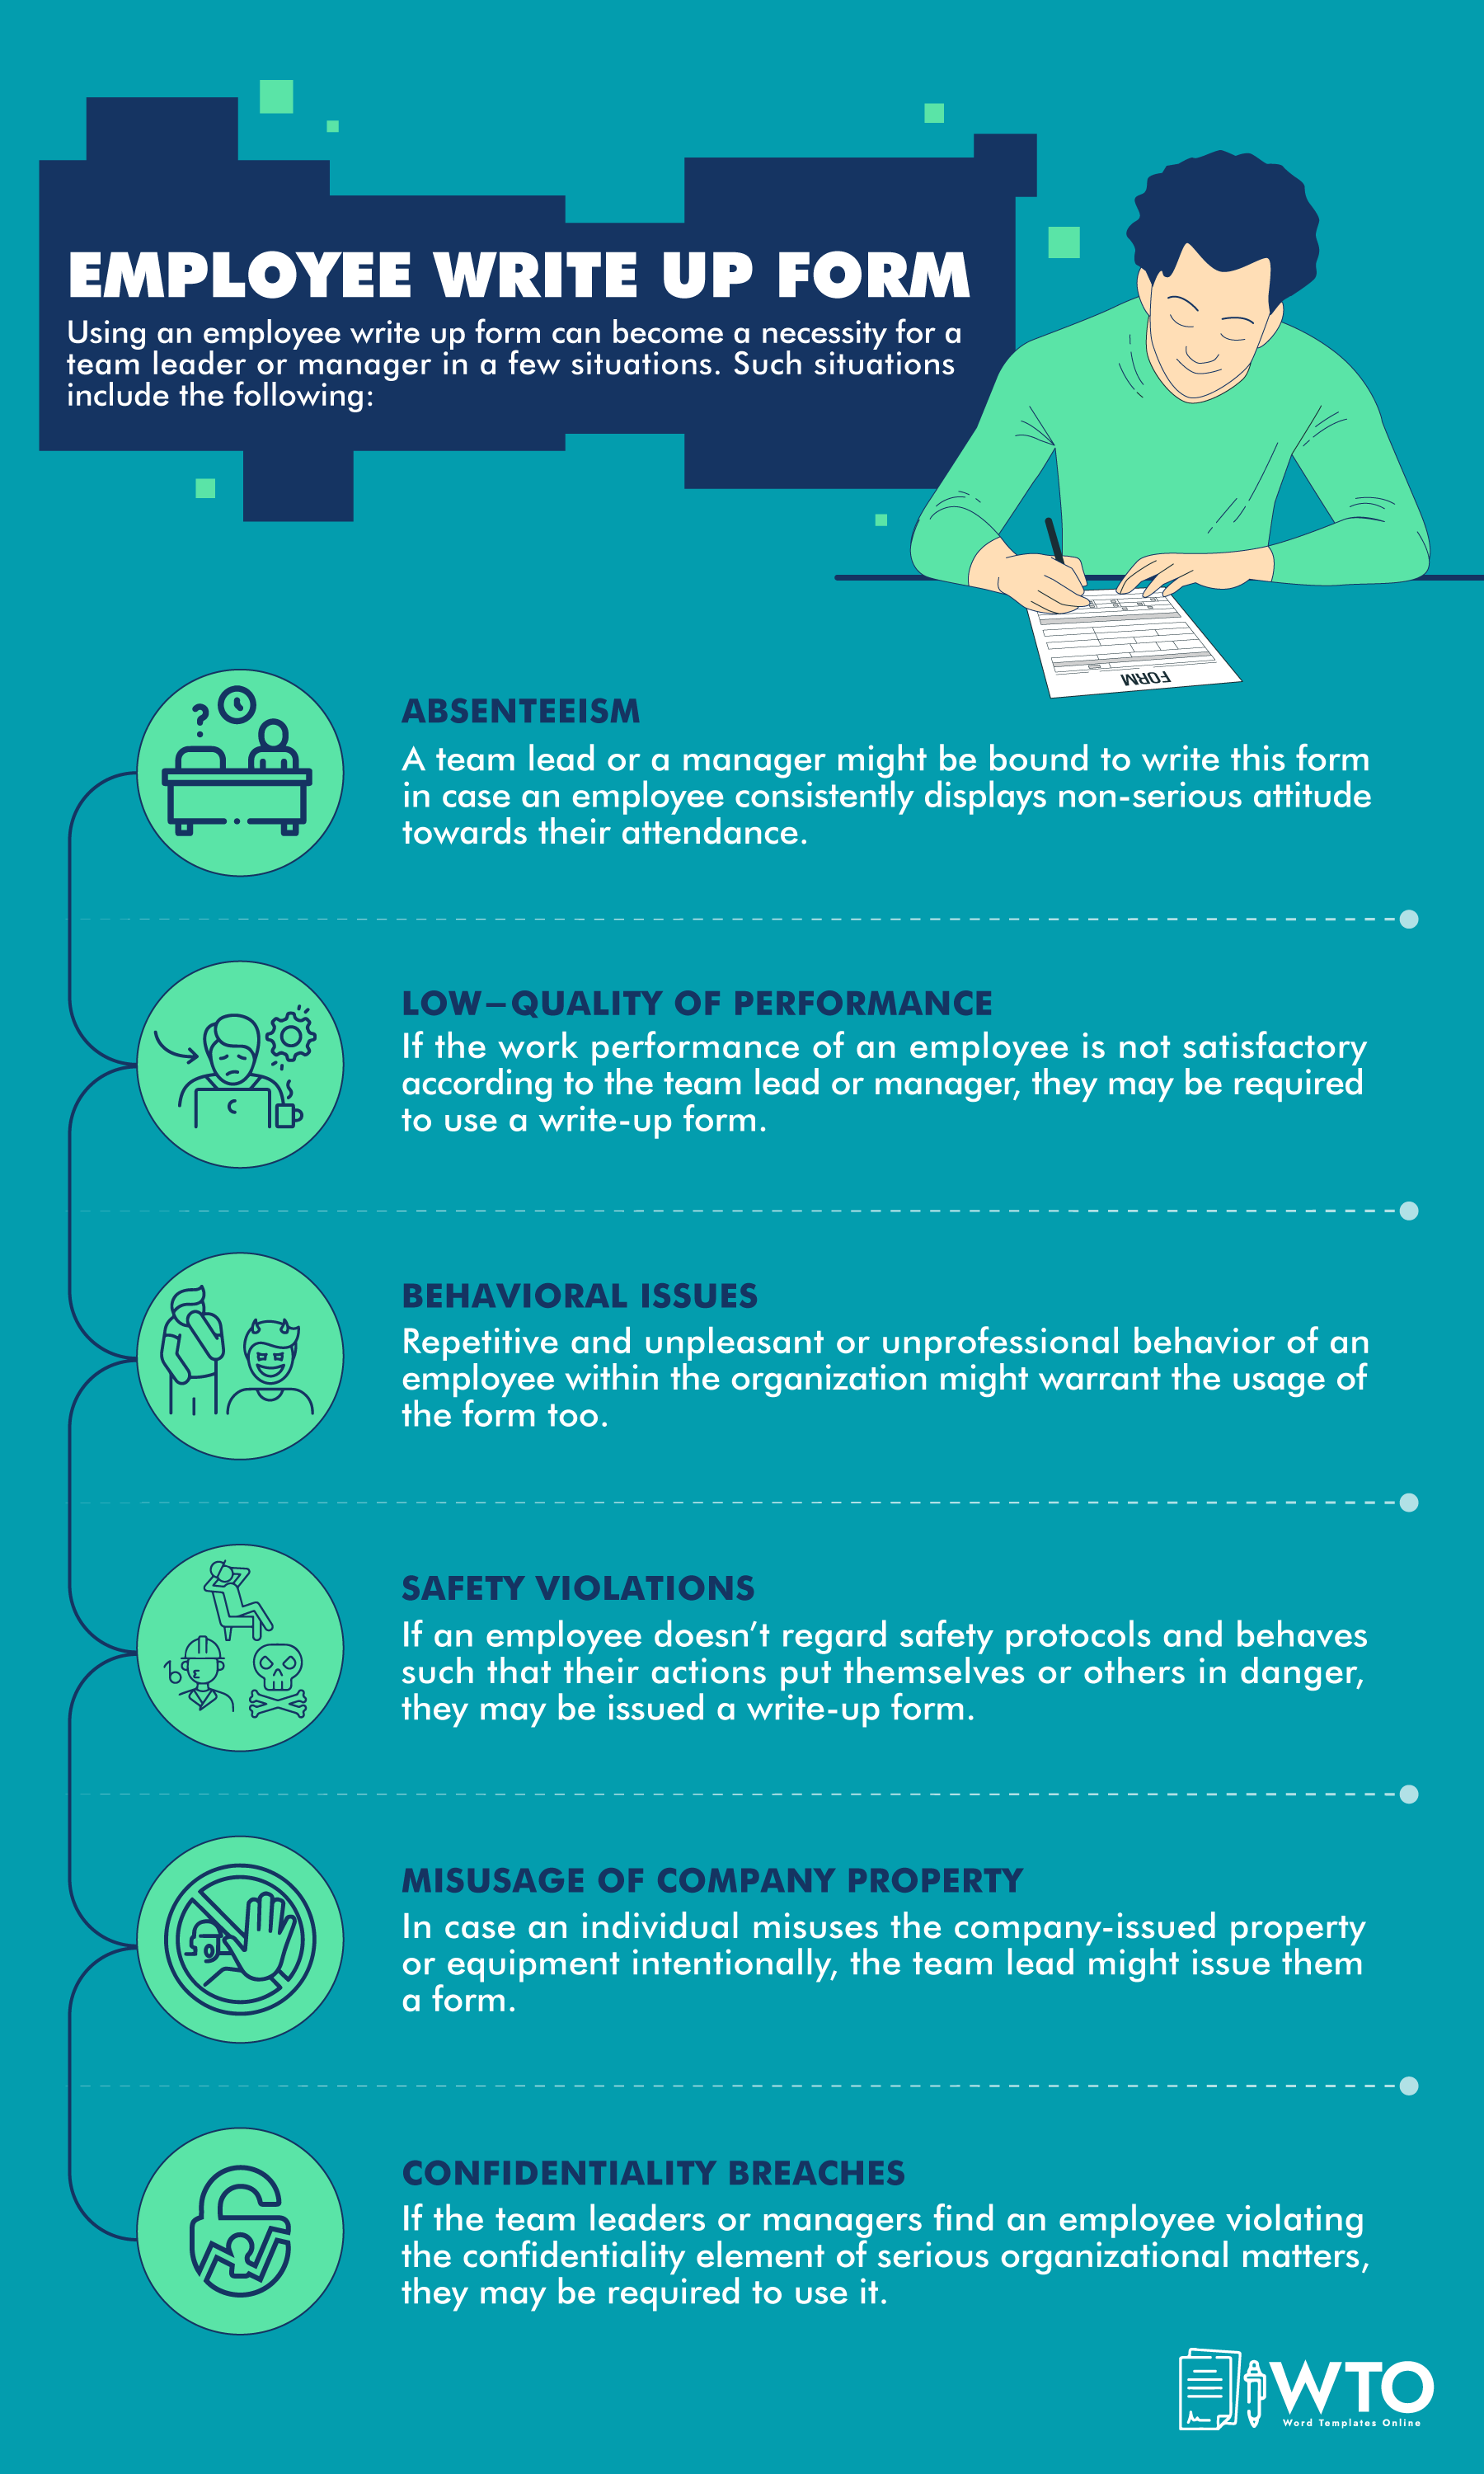 This infographic is about when to use employee write-up form.